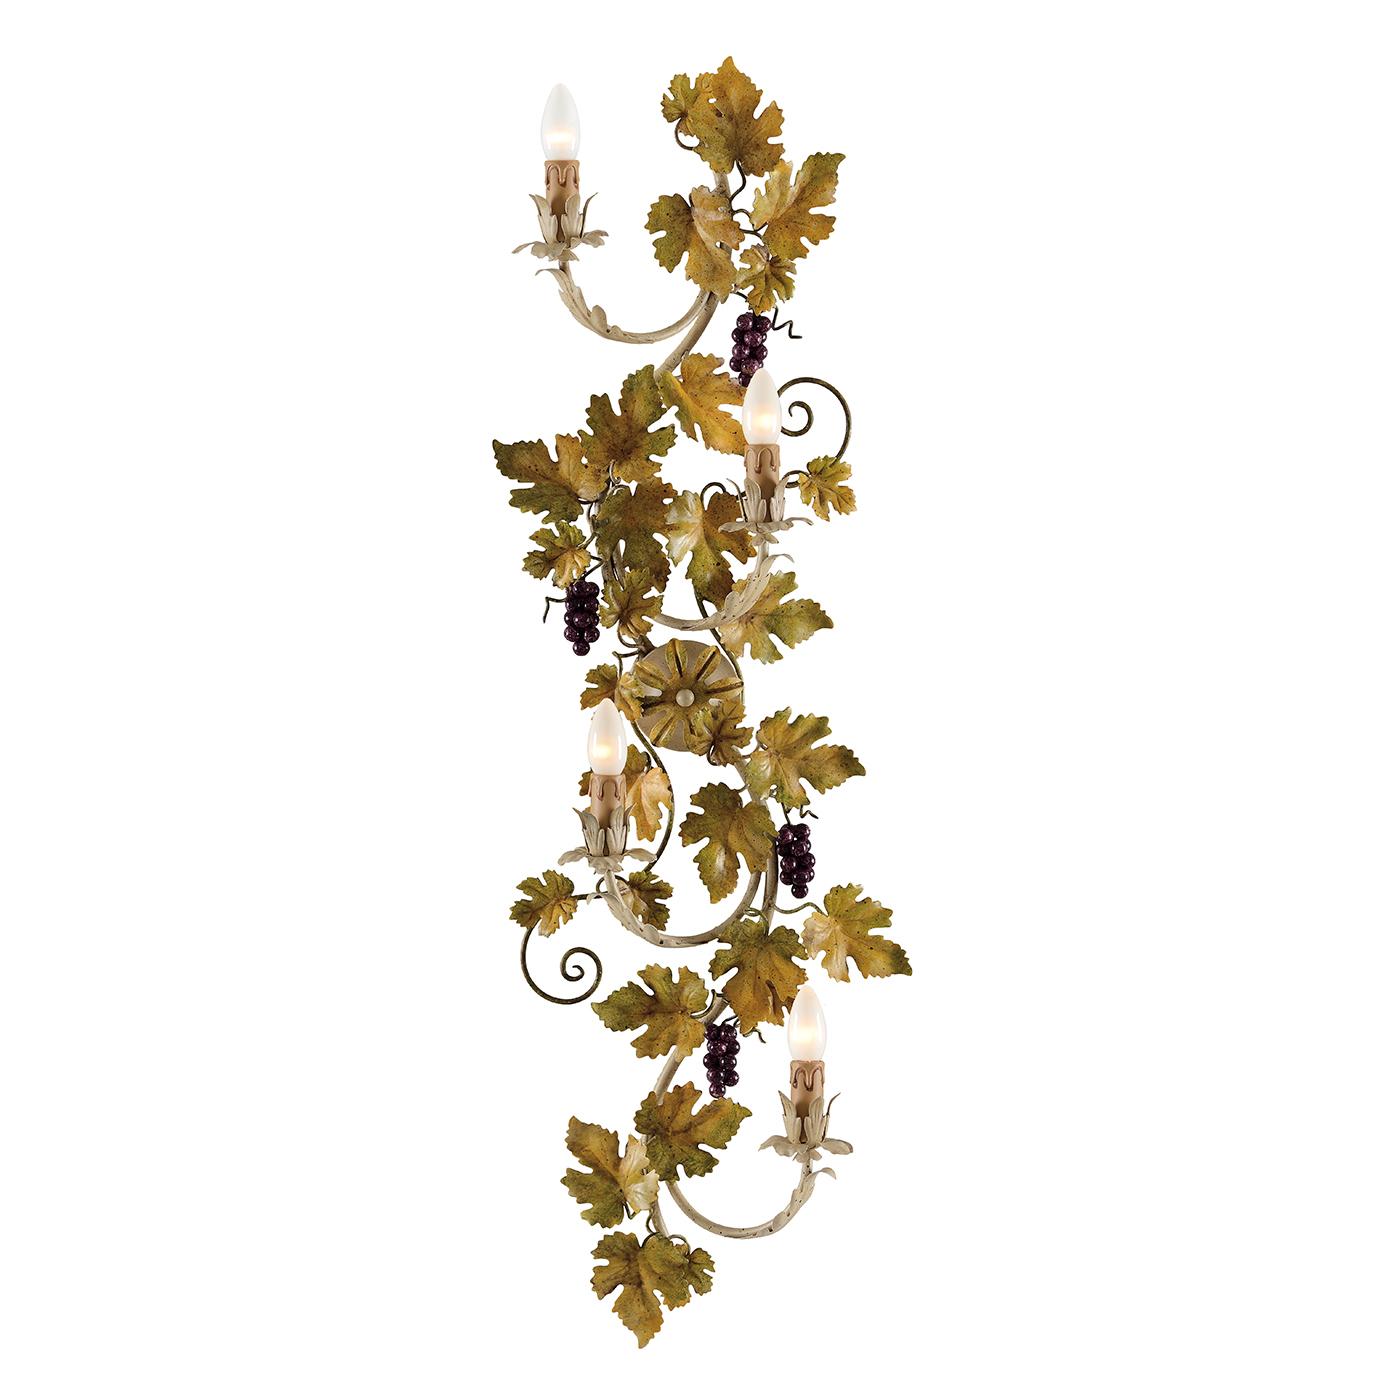 Elegantly hand-decorated grape leaves and small bunches of grapes form the body of this sophisticated, antiqued metal sconce, almost hiding the four bulbs that rest on upturned arms and making this light fixture as decorative as it is practical.